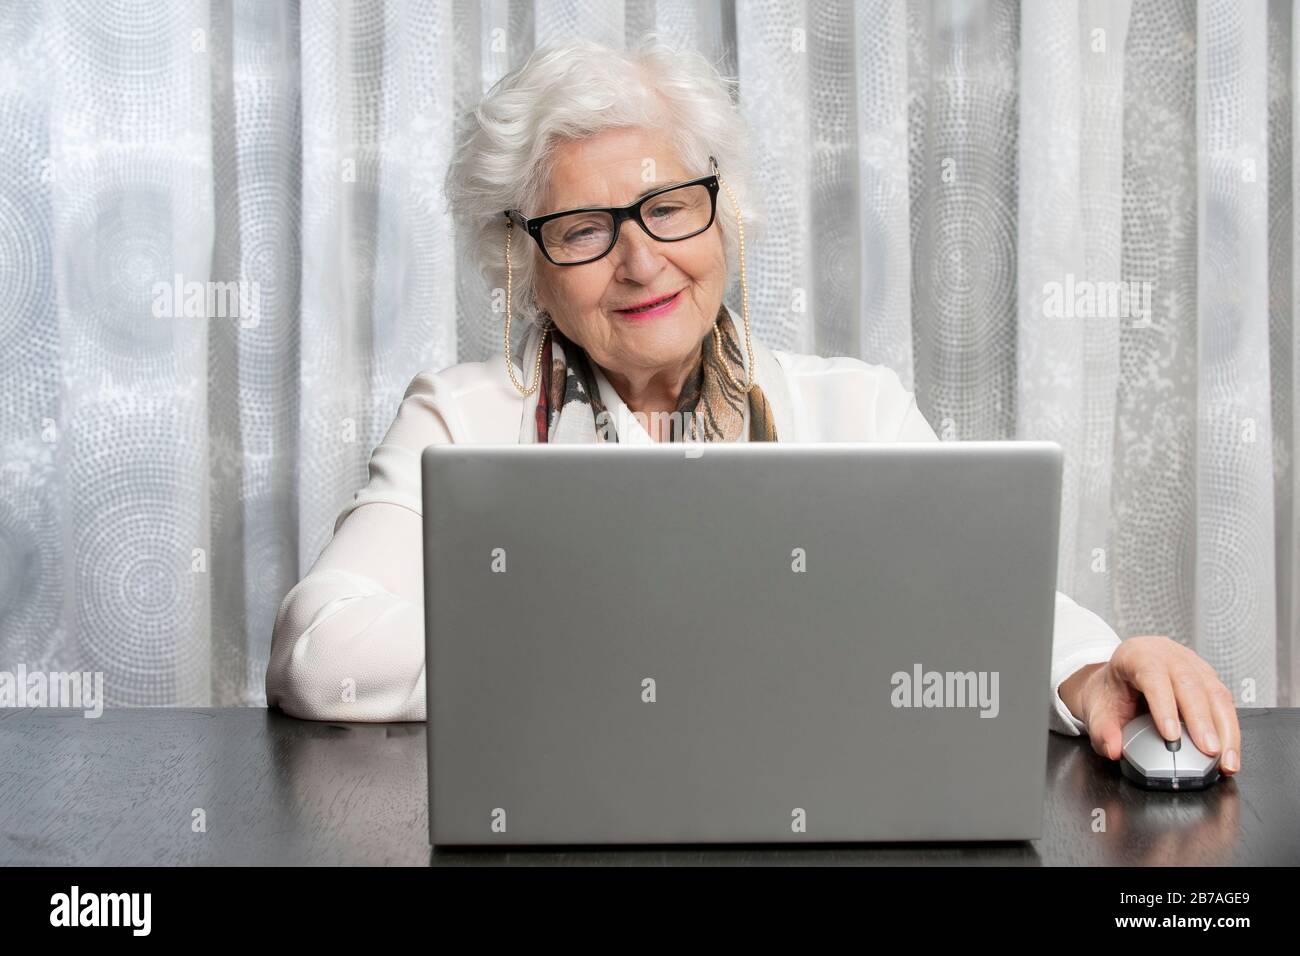 old lady with glasses looking at a computer on a wooden table. concept of technology , grandma, health Stock Photo